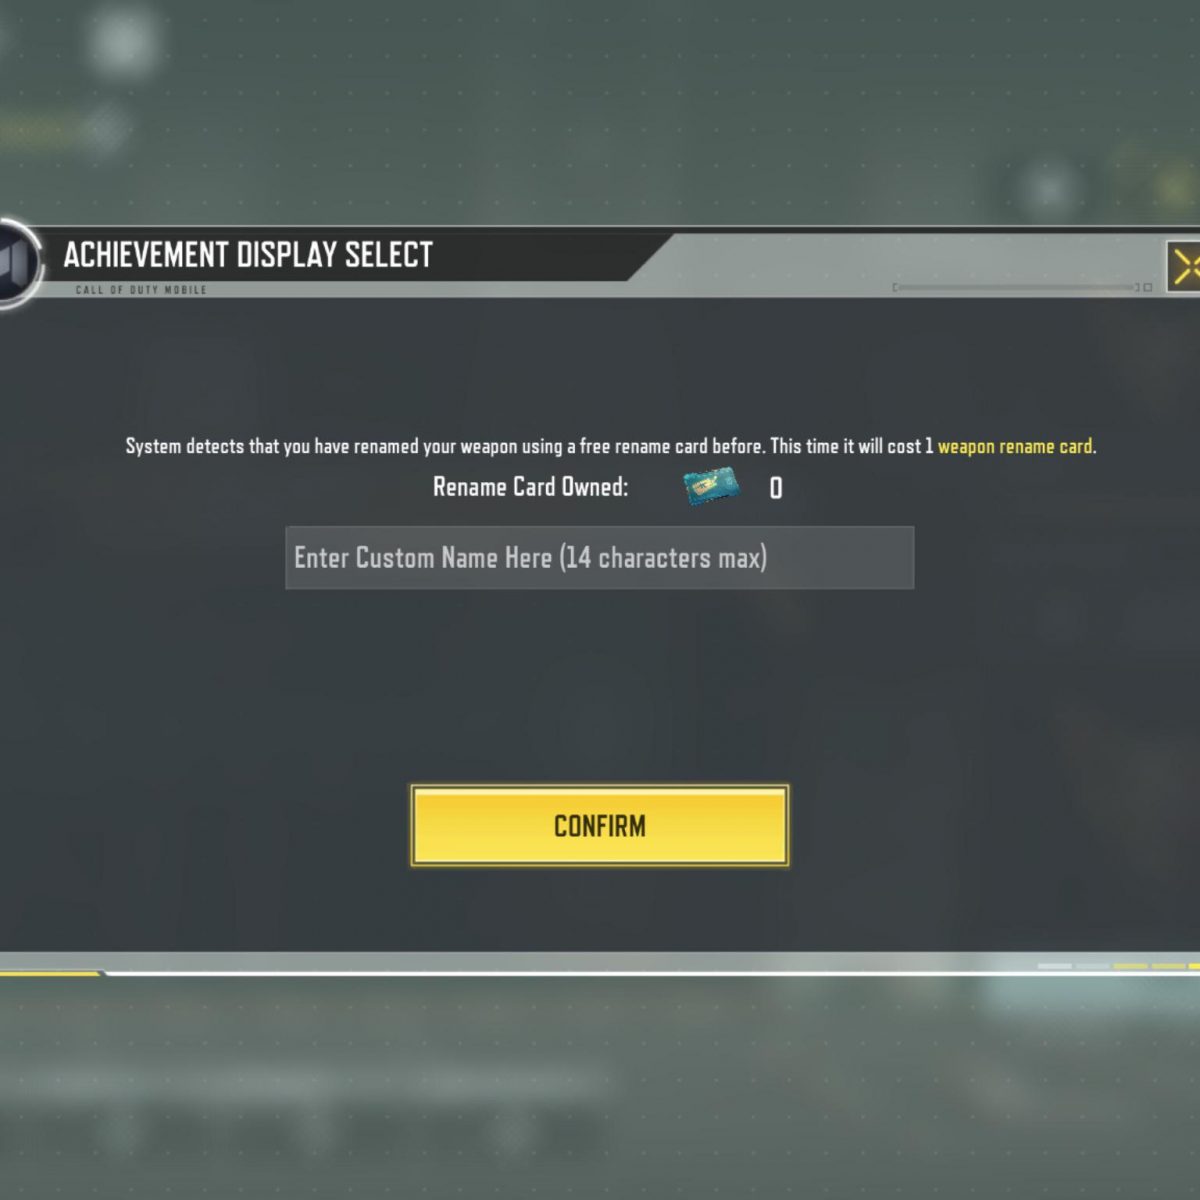 Call of Duty Mobile: Here is how you can customize your profile